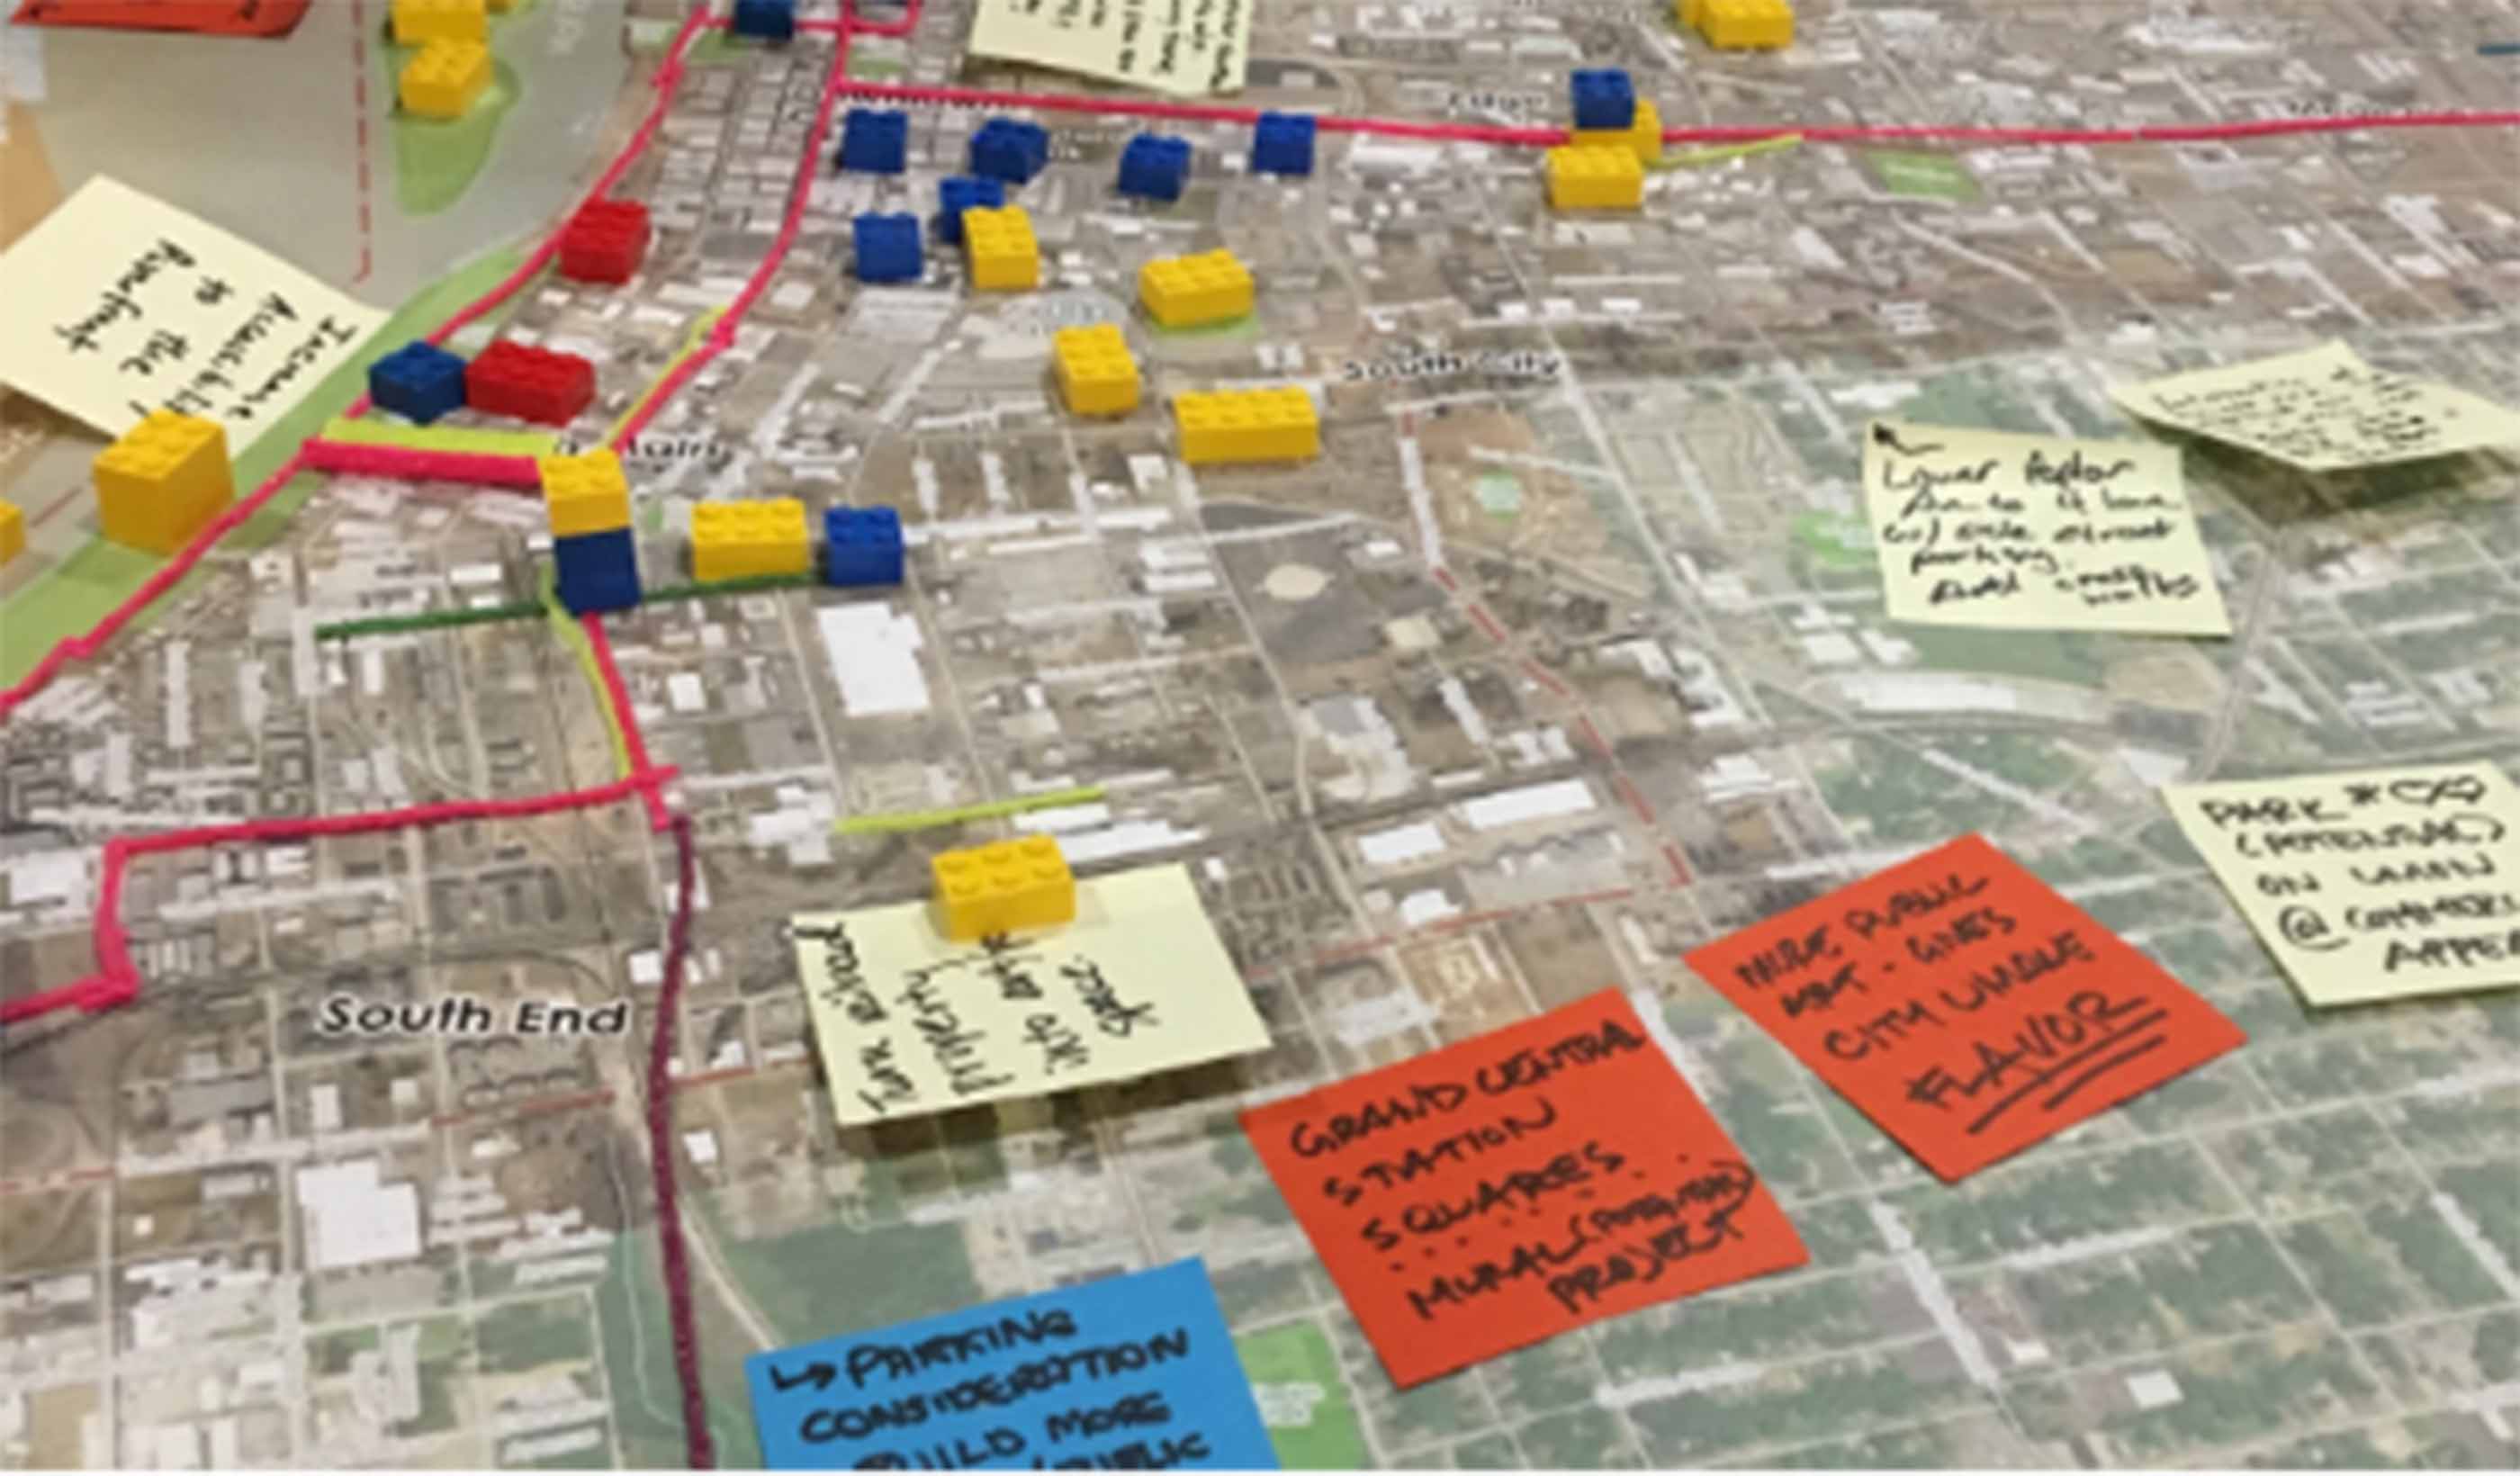 City planning: A guide to equitable planning for your community